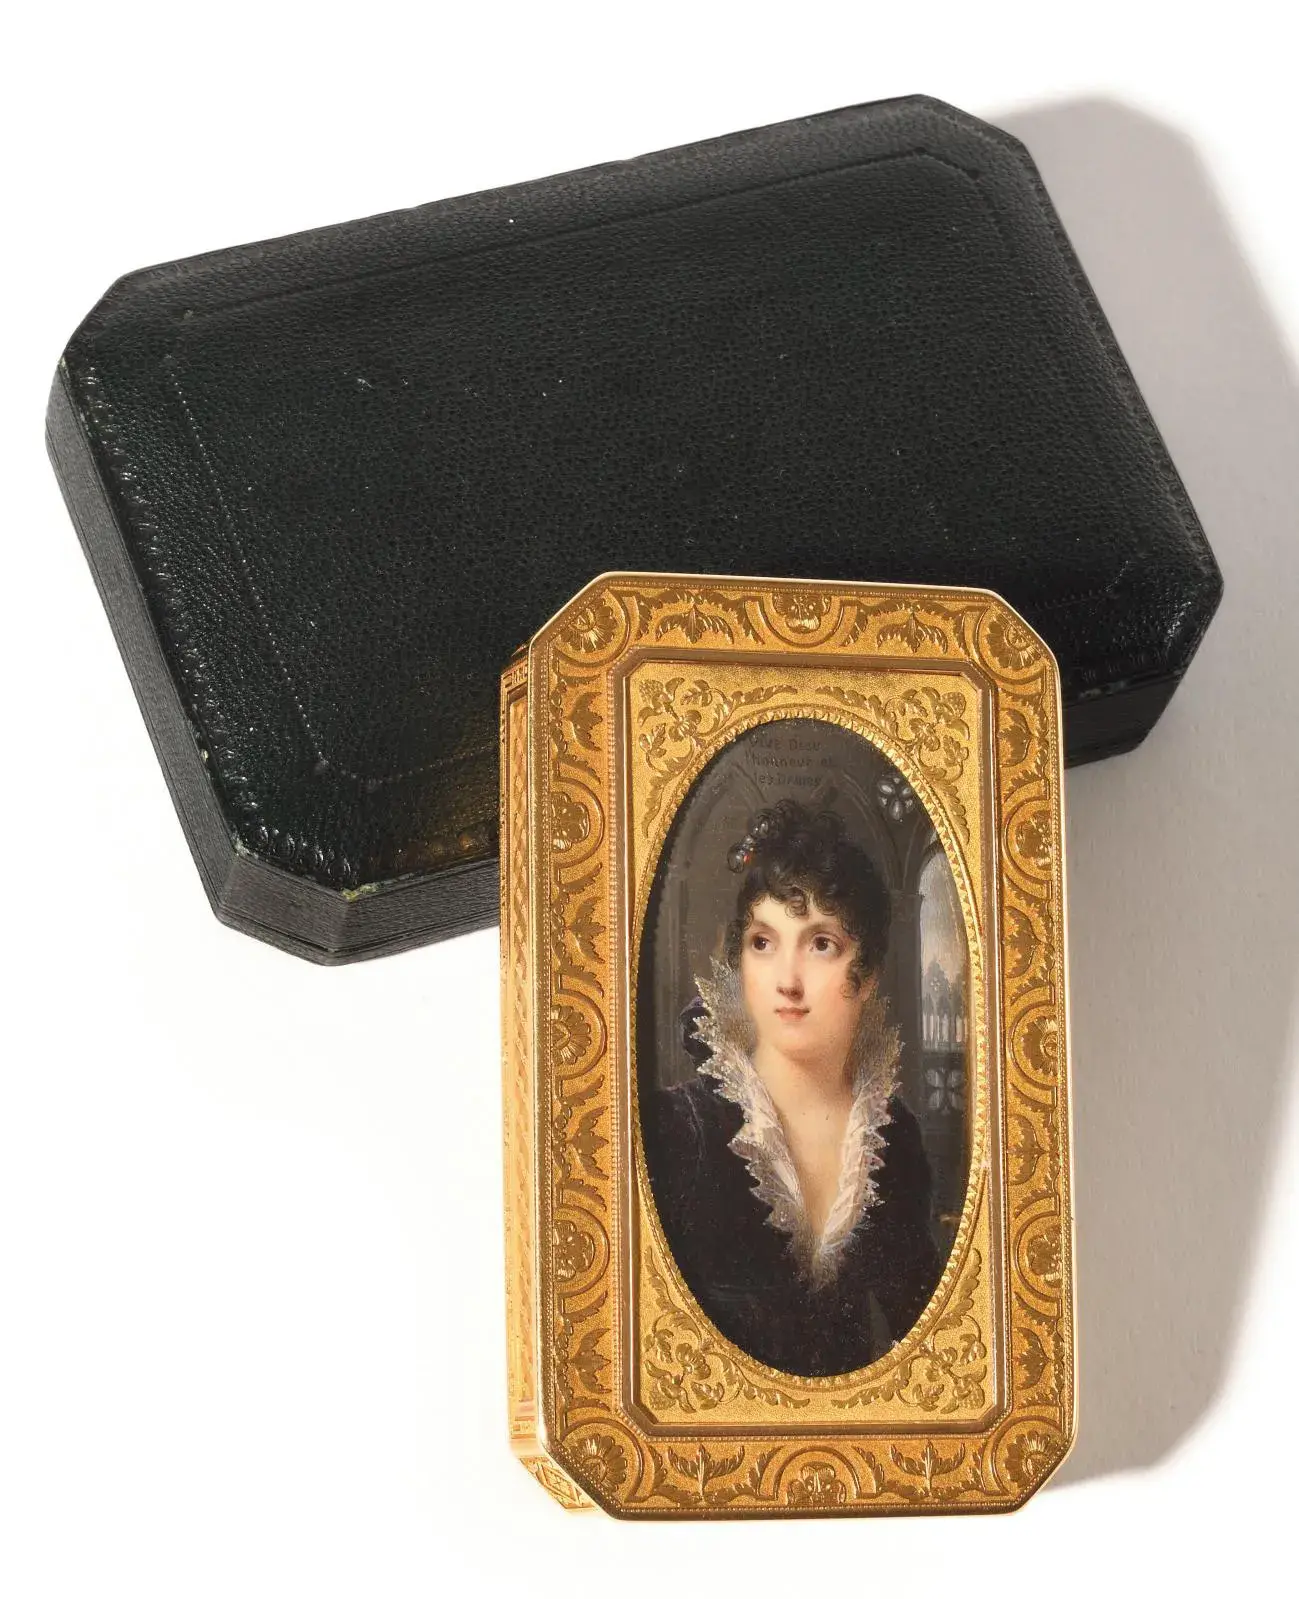 Jean-Baptiste Isabey (1767-1855, painter) and Étienne Lucien Blerzy (goldsmith), gold box chased with foliated floral patterns and shells, decorated with a miniature of the Duchess of Bassano, 9 x 5.5 x 1.8 cm/3.5 x 2 x 0.4 in., gross weight 151 g/5.3 oz. Fontainebleau, March 22, 2021. Osenat Auction House. Mr. Dey.
Sold for €106,250